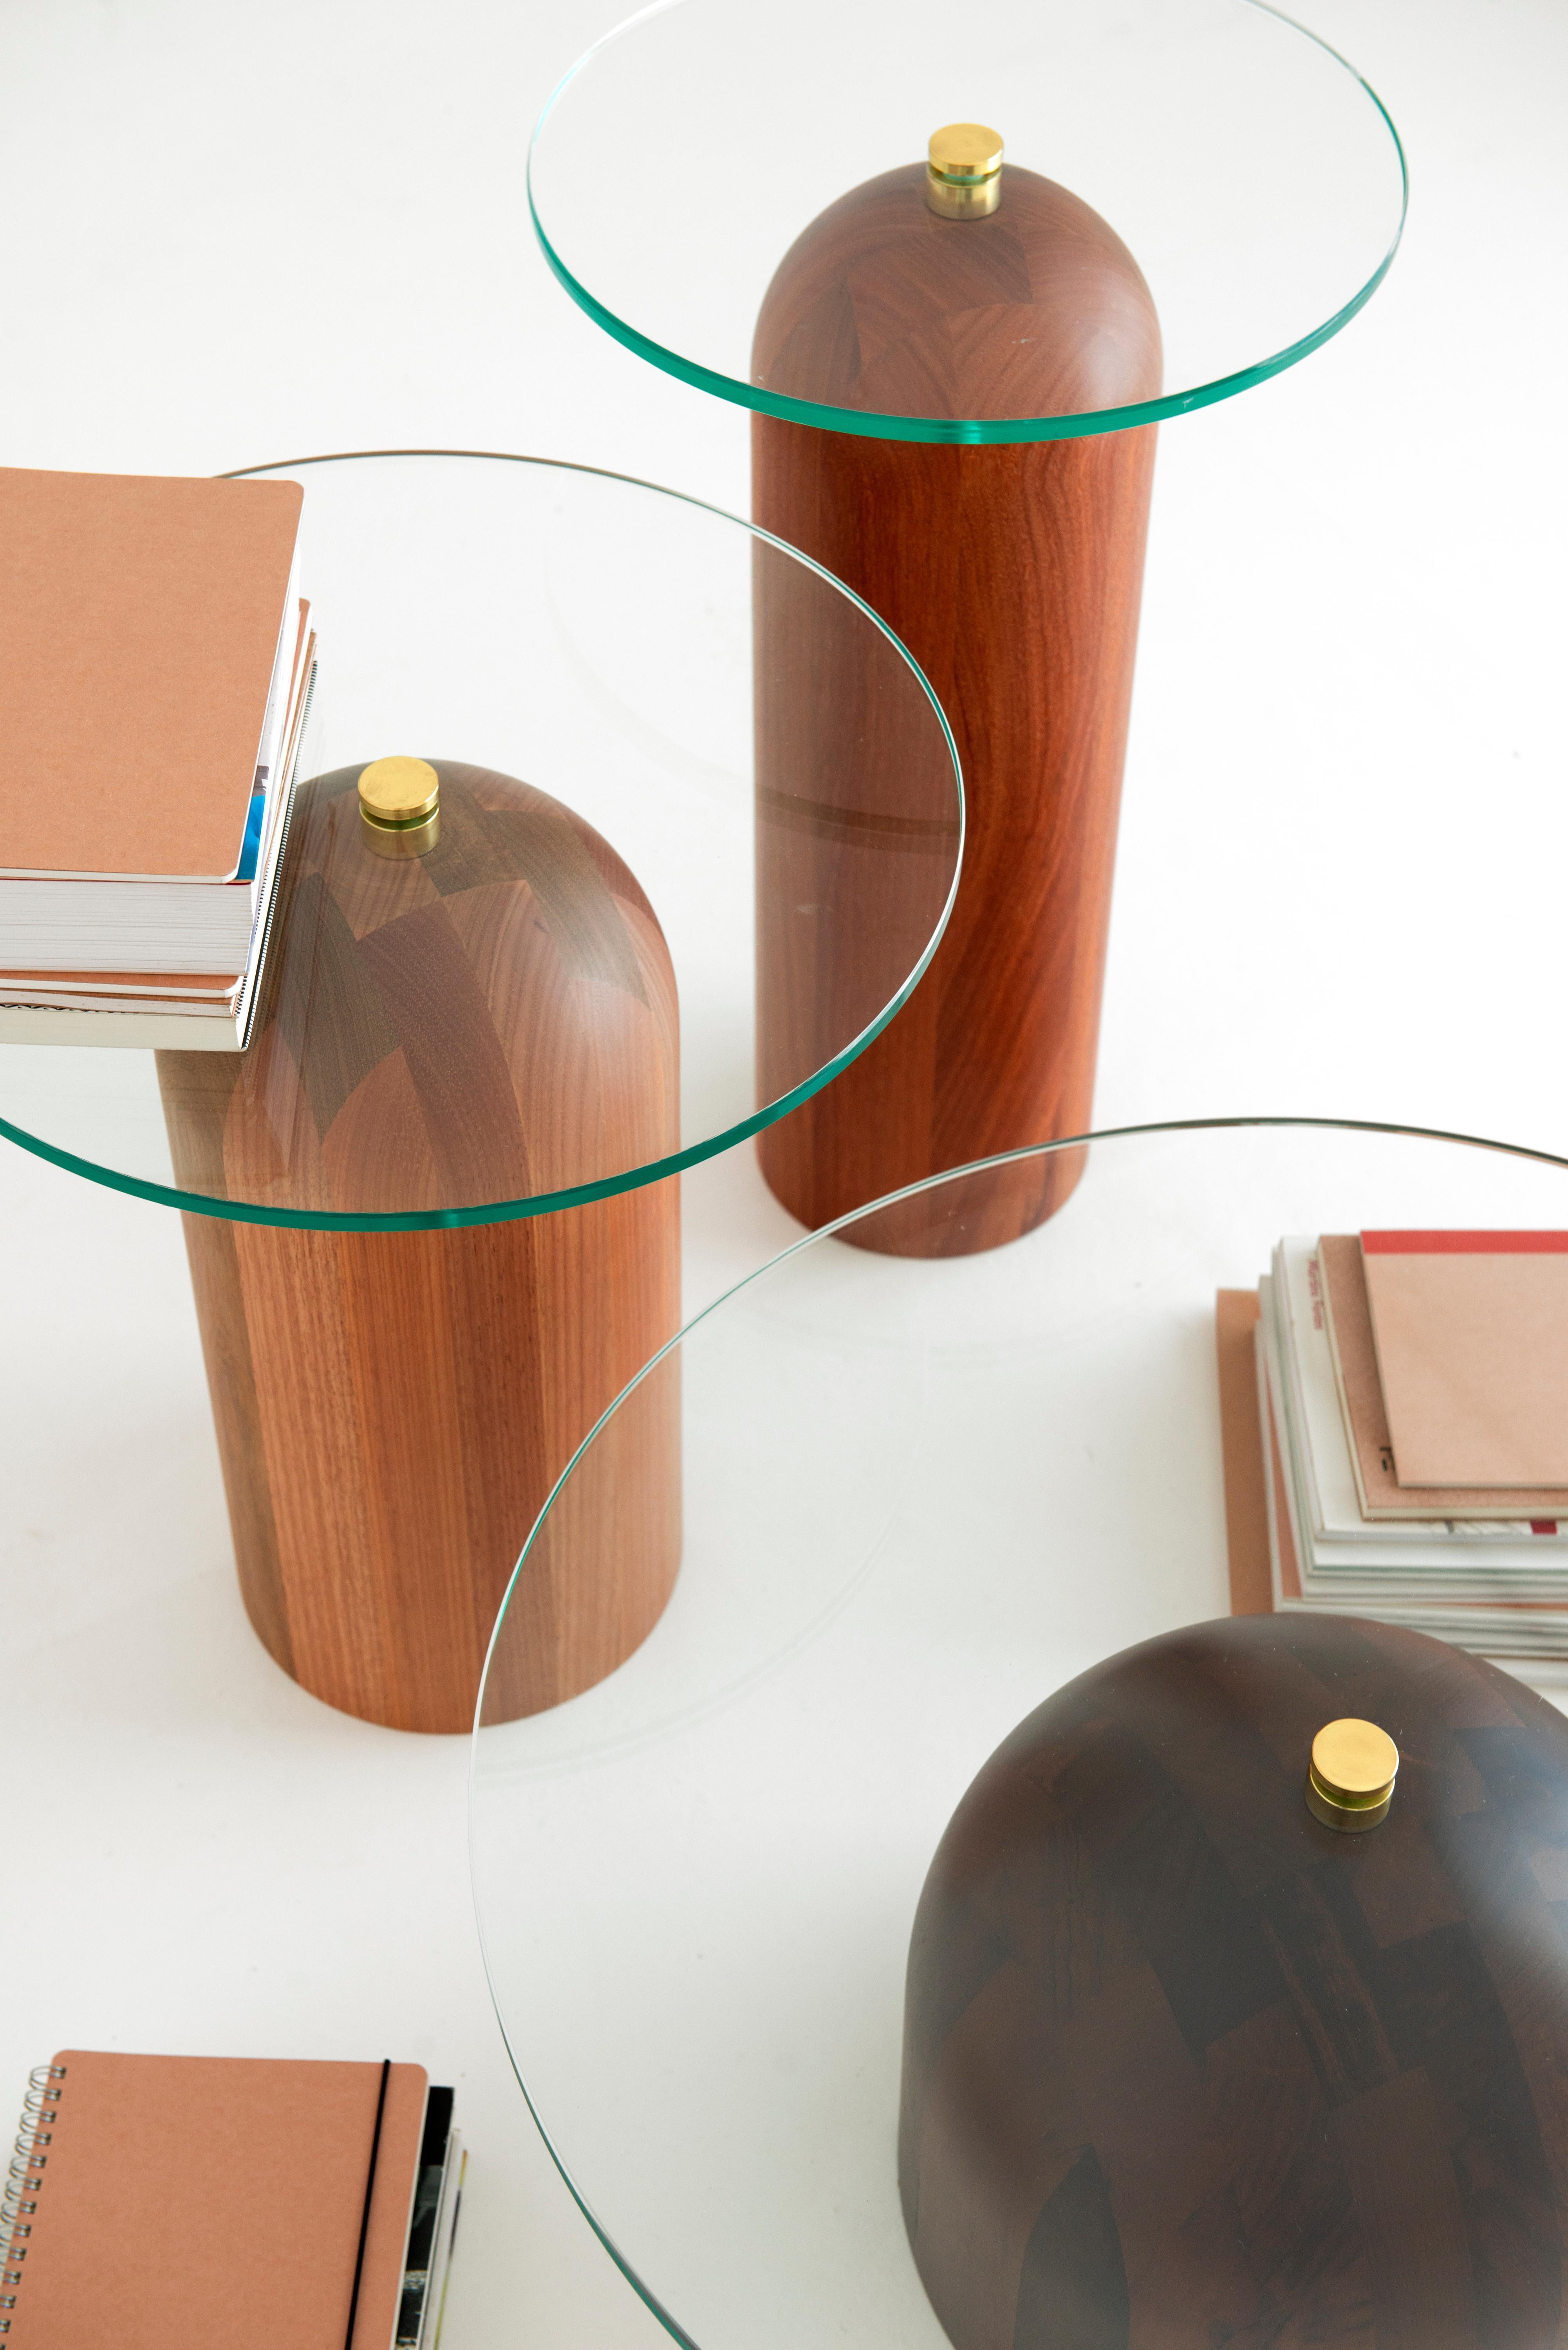 Trio of side tables - Leandro Garcia - Contemporary Brazil Design
Cylindrical wood legs (dark color), wooden seat (light color), and polished brass hoops

Overall dimensions: 
Low: 30 x 63 x 63 cm
Medium: 48 x 42 x 42 cm
Tall: 58 x 35 x 35